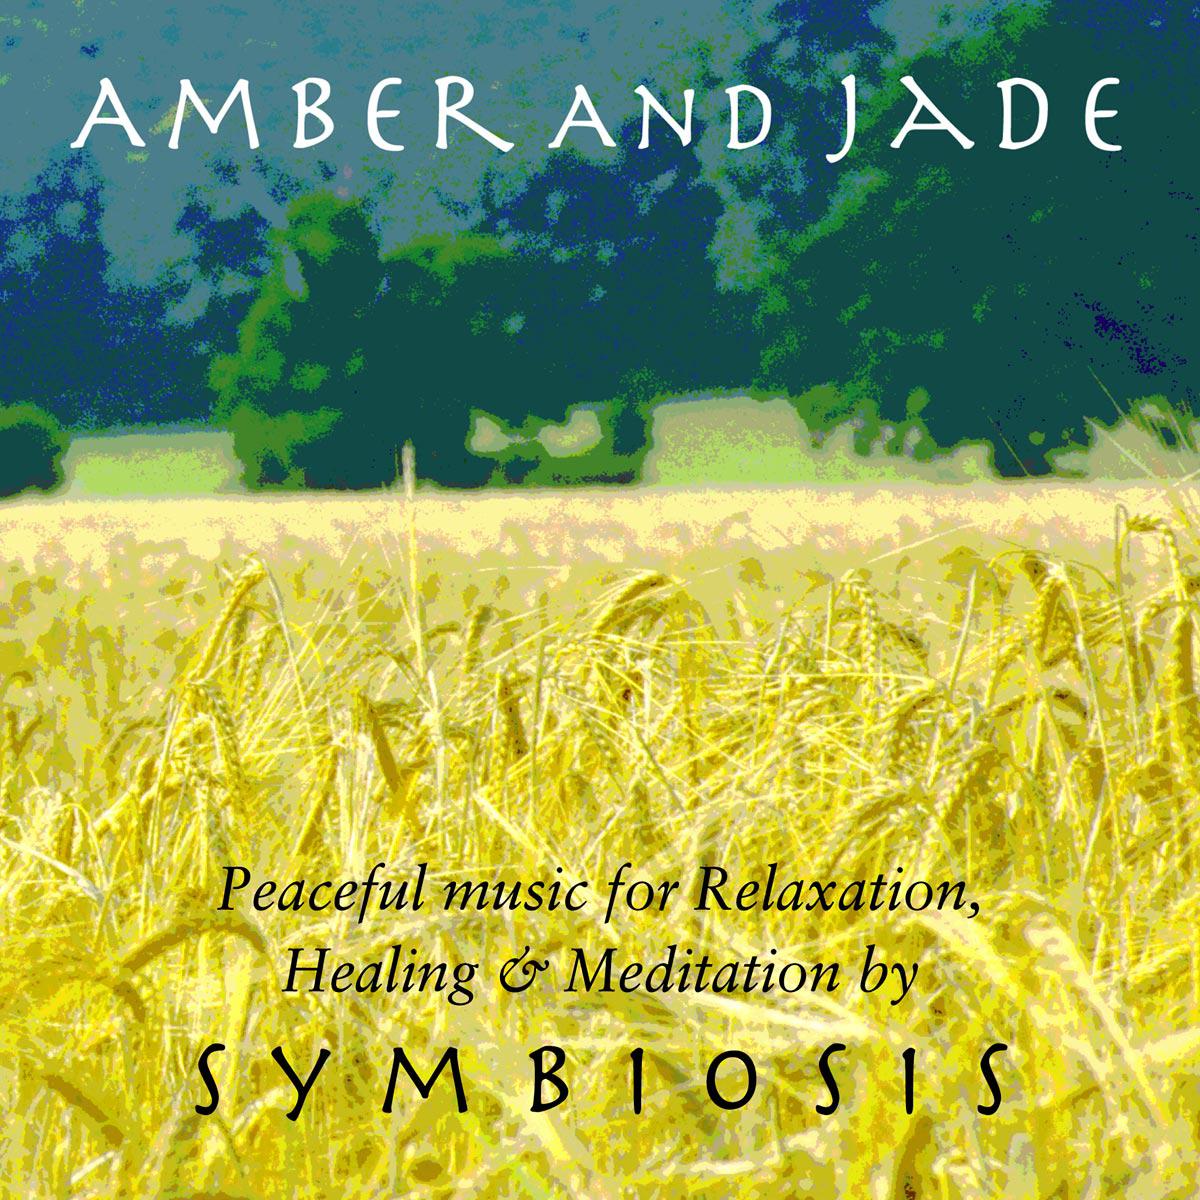 The artwork for Amber & Jade by Symbiosis